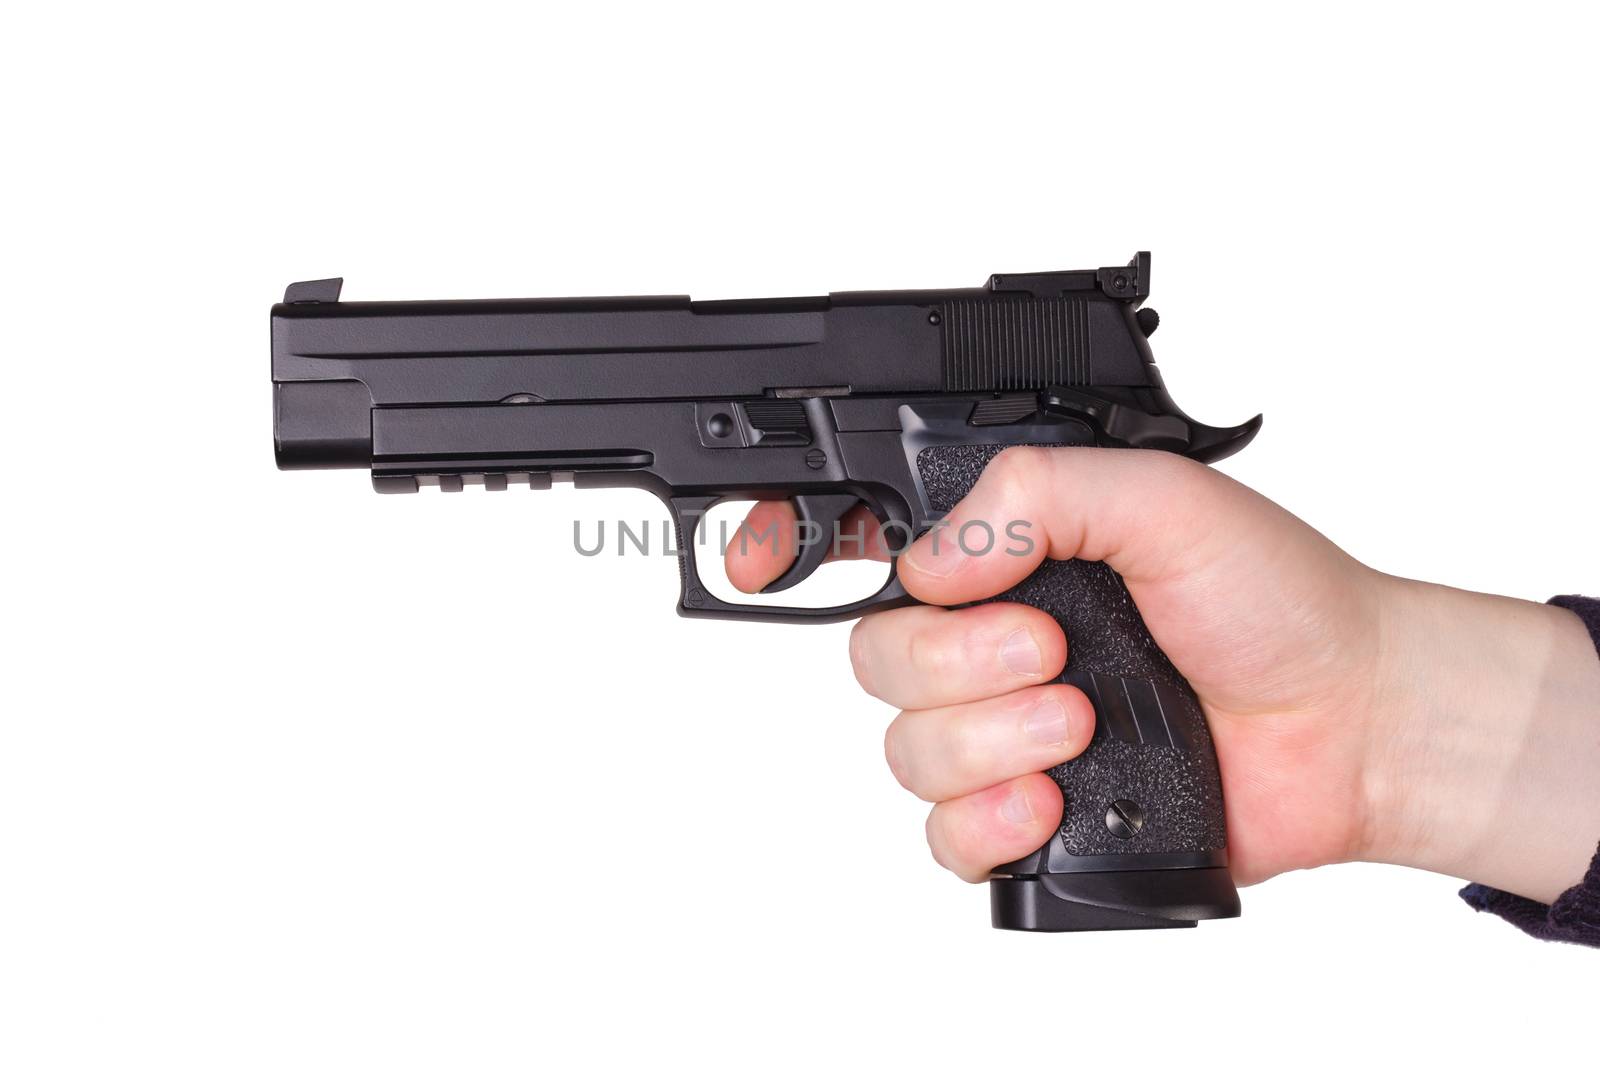 man, getting on the hip a pistol, on a white background